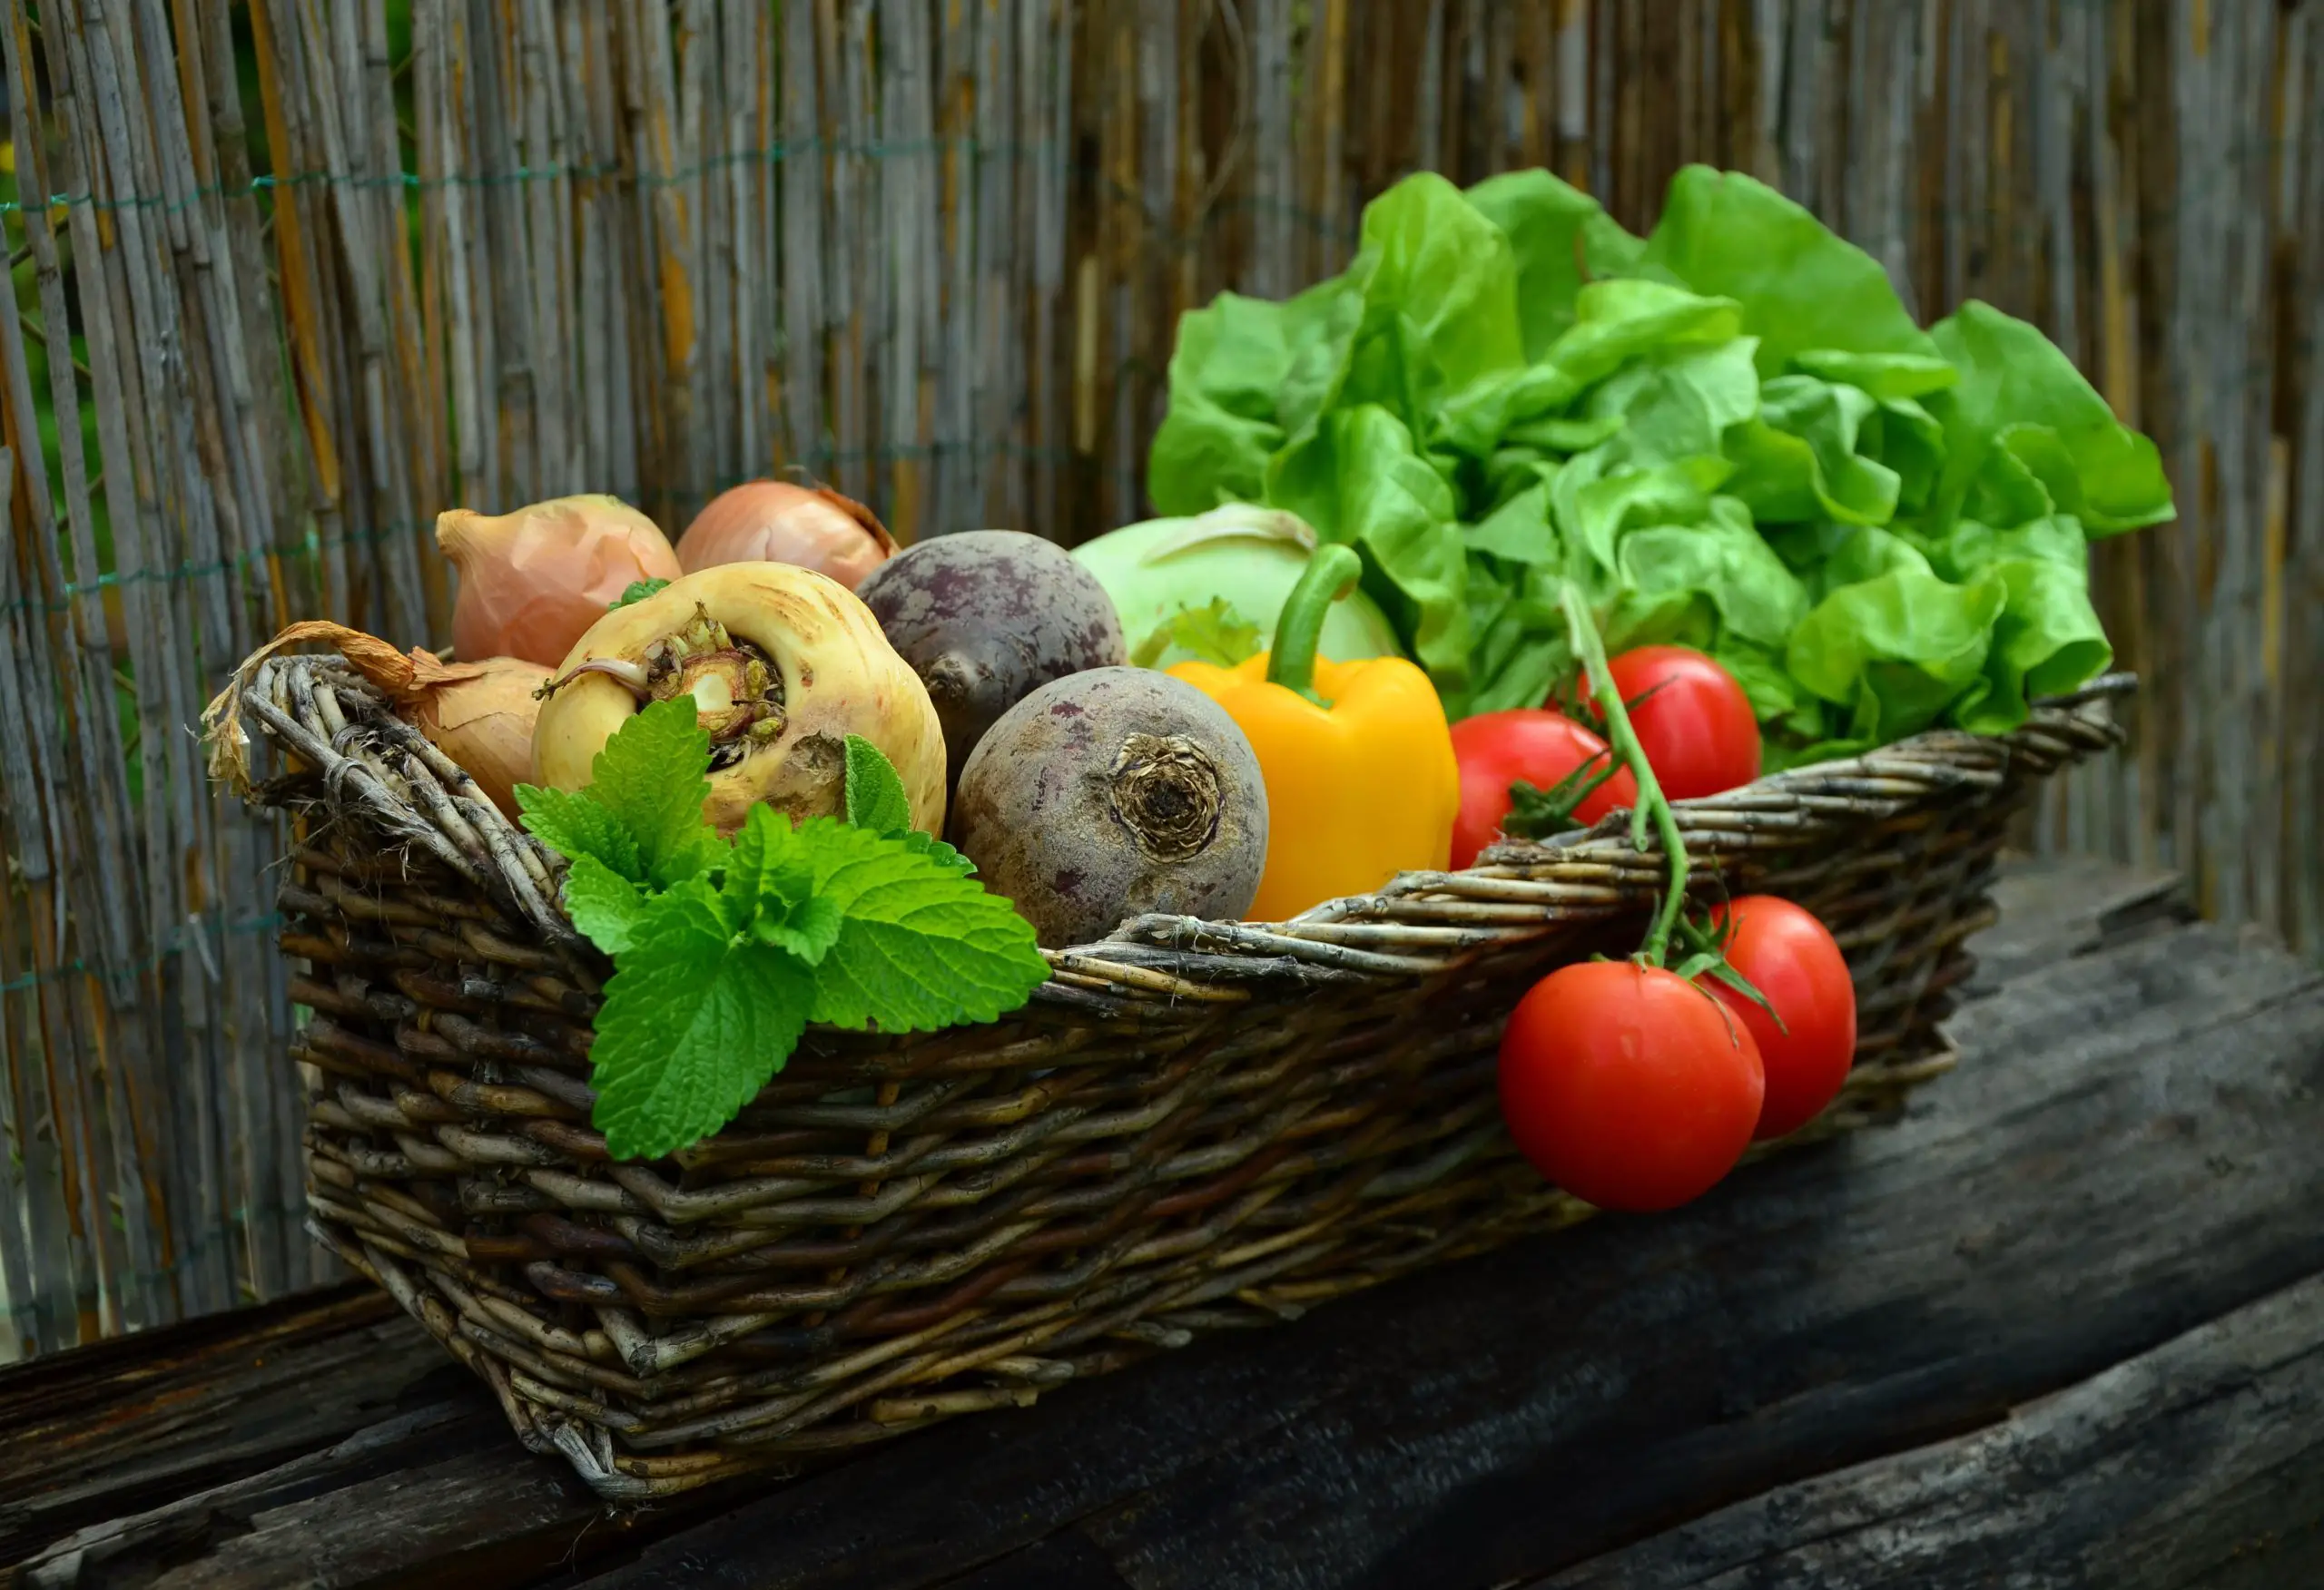 What are the fruits and vegetables in season?